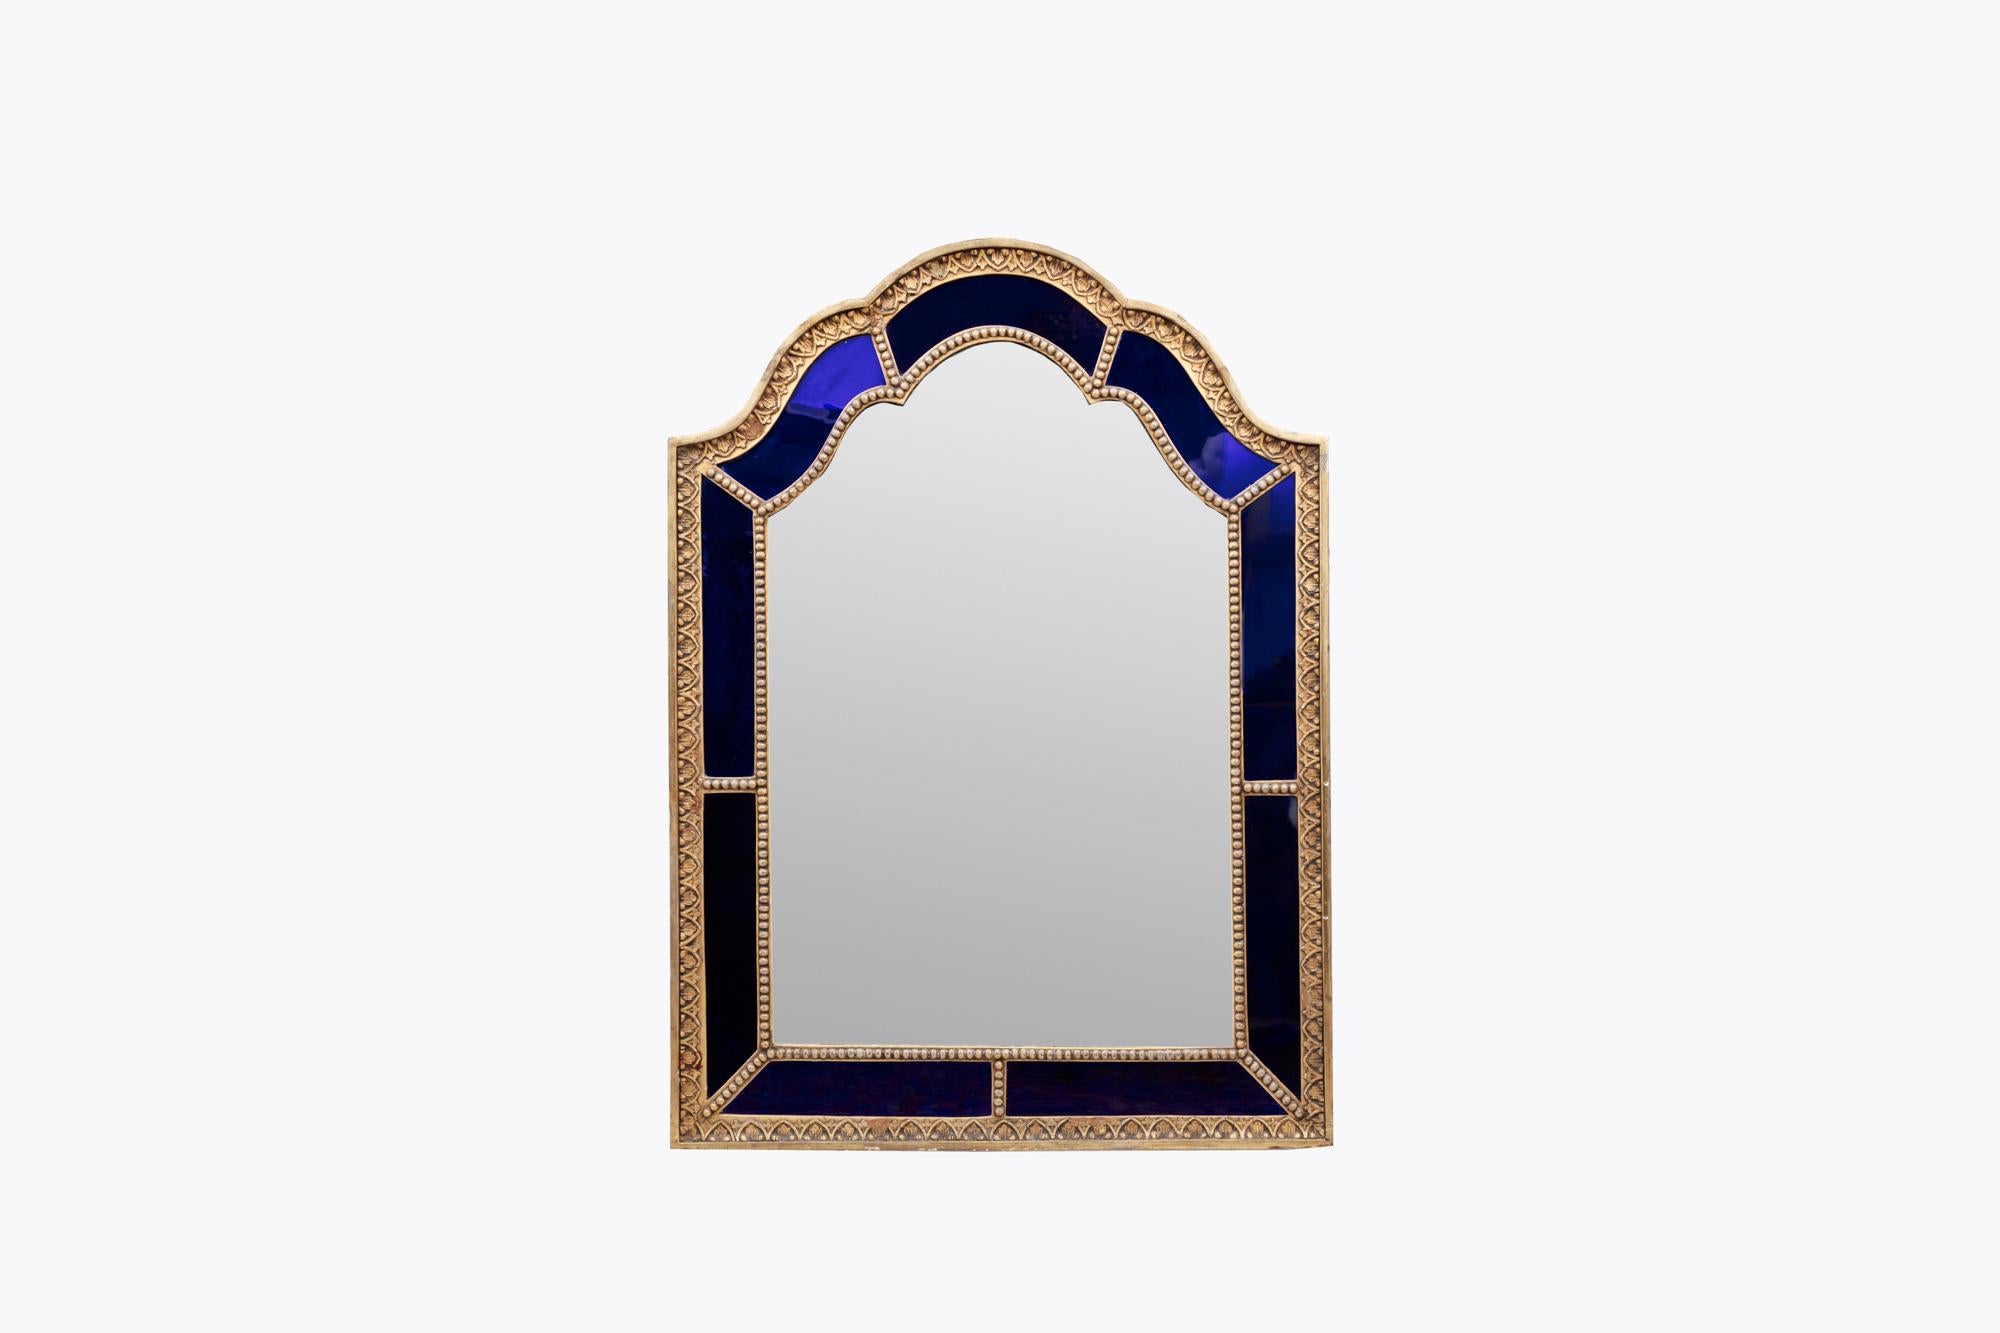 19th Century arched blue glass gilt-composition mirror. The deep cobalt blue border glass frame with gilt stiff-leaf and beaded border, surrounding shaped bevelled plate. The plate is set within a reverse-painted gold-speckled cobalt blue glass